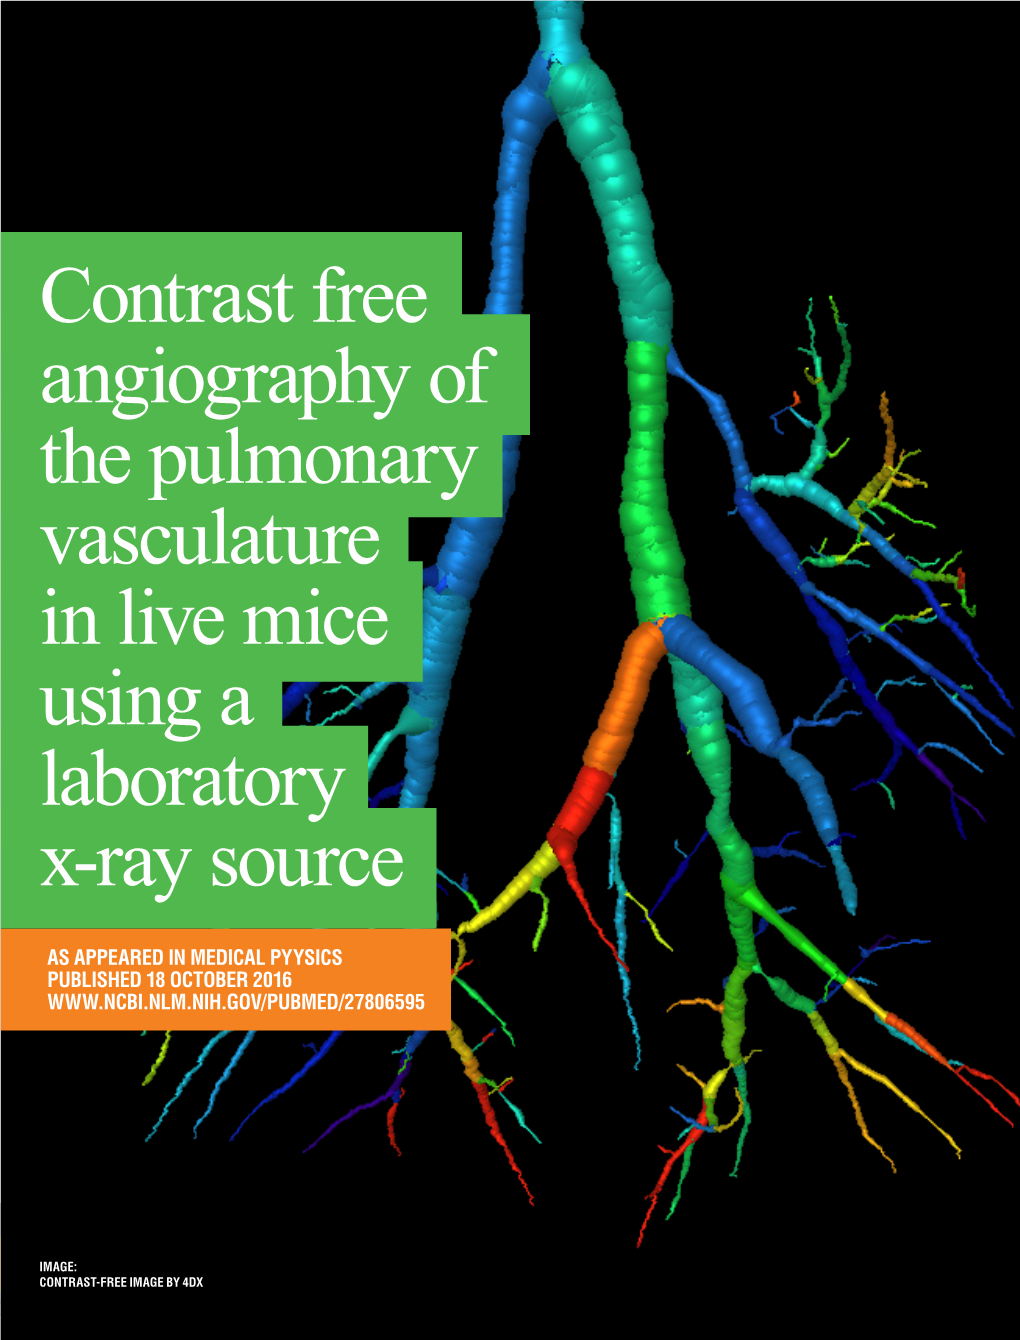 Contrast Free Angiography of the Pulmonary Vasculature in Live Mice Using a Laboratory X-Ray Source